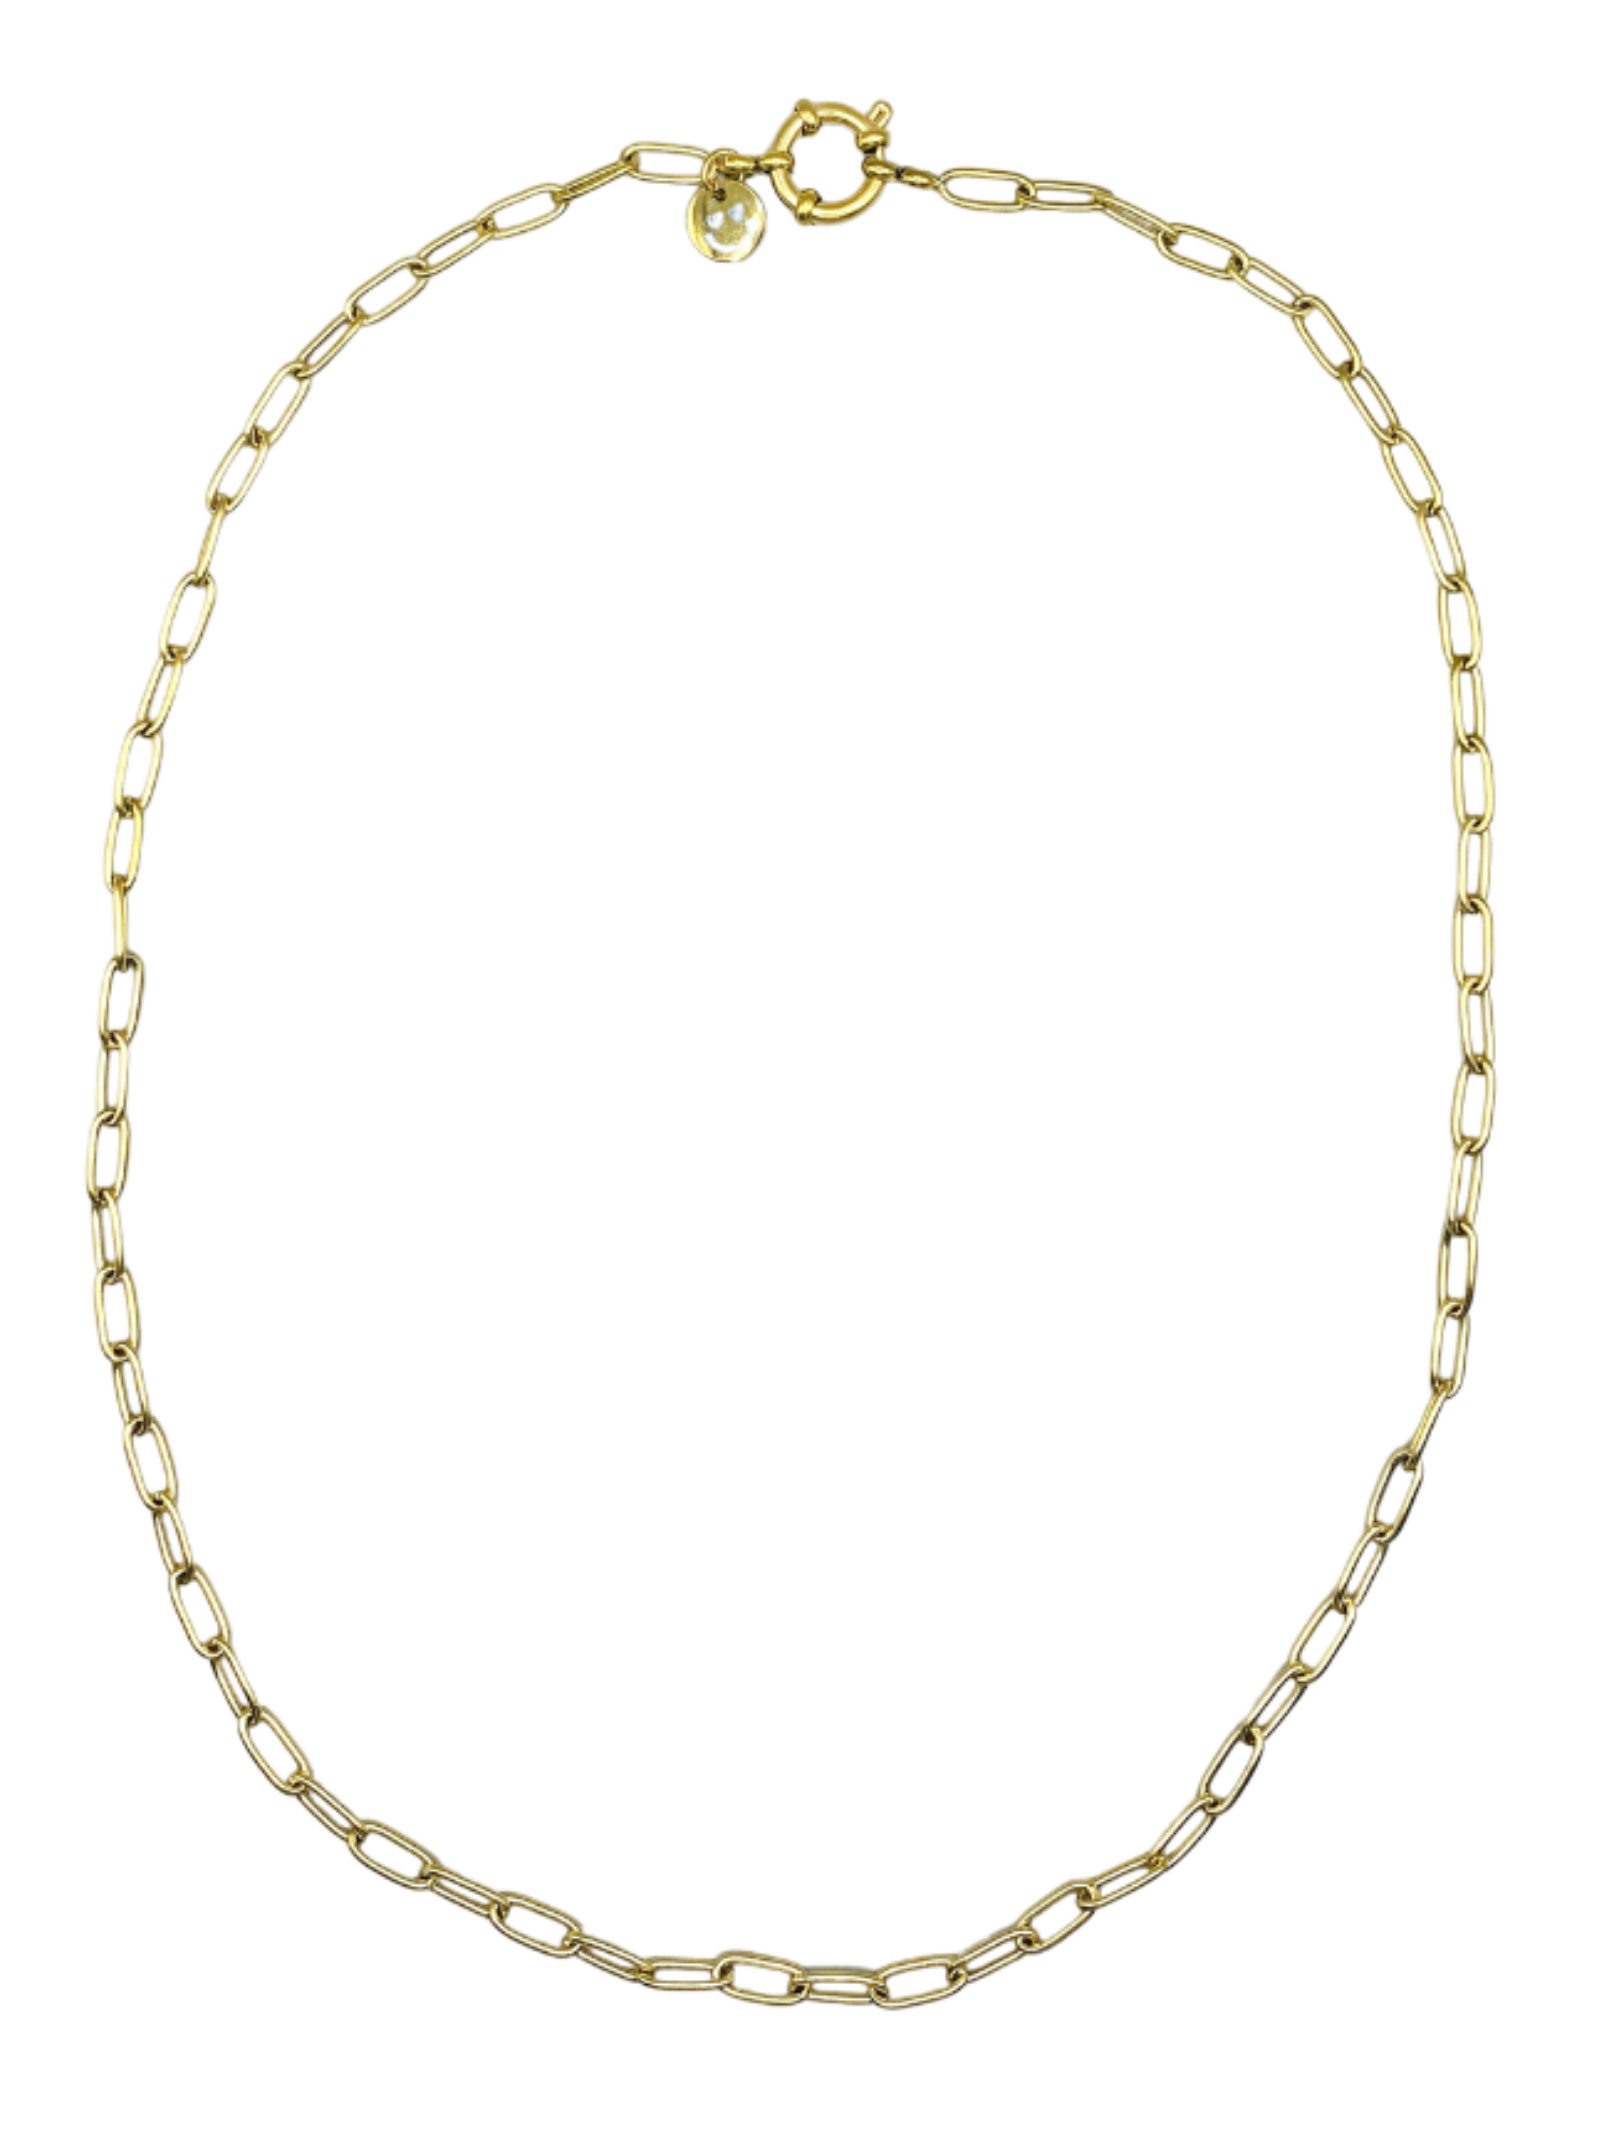 Boyfriend Necklace ~ 18K gold plated stainless steel